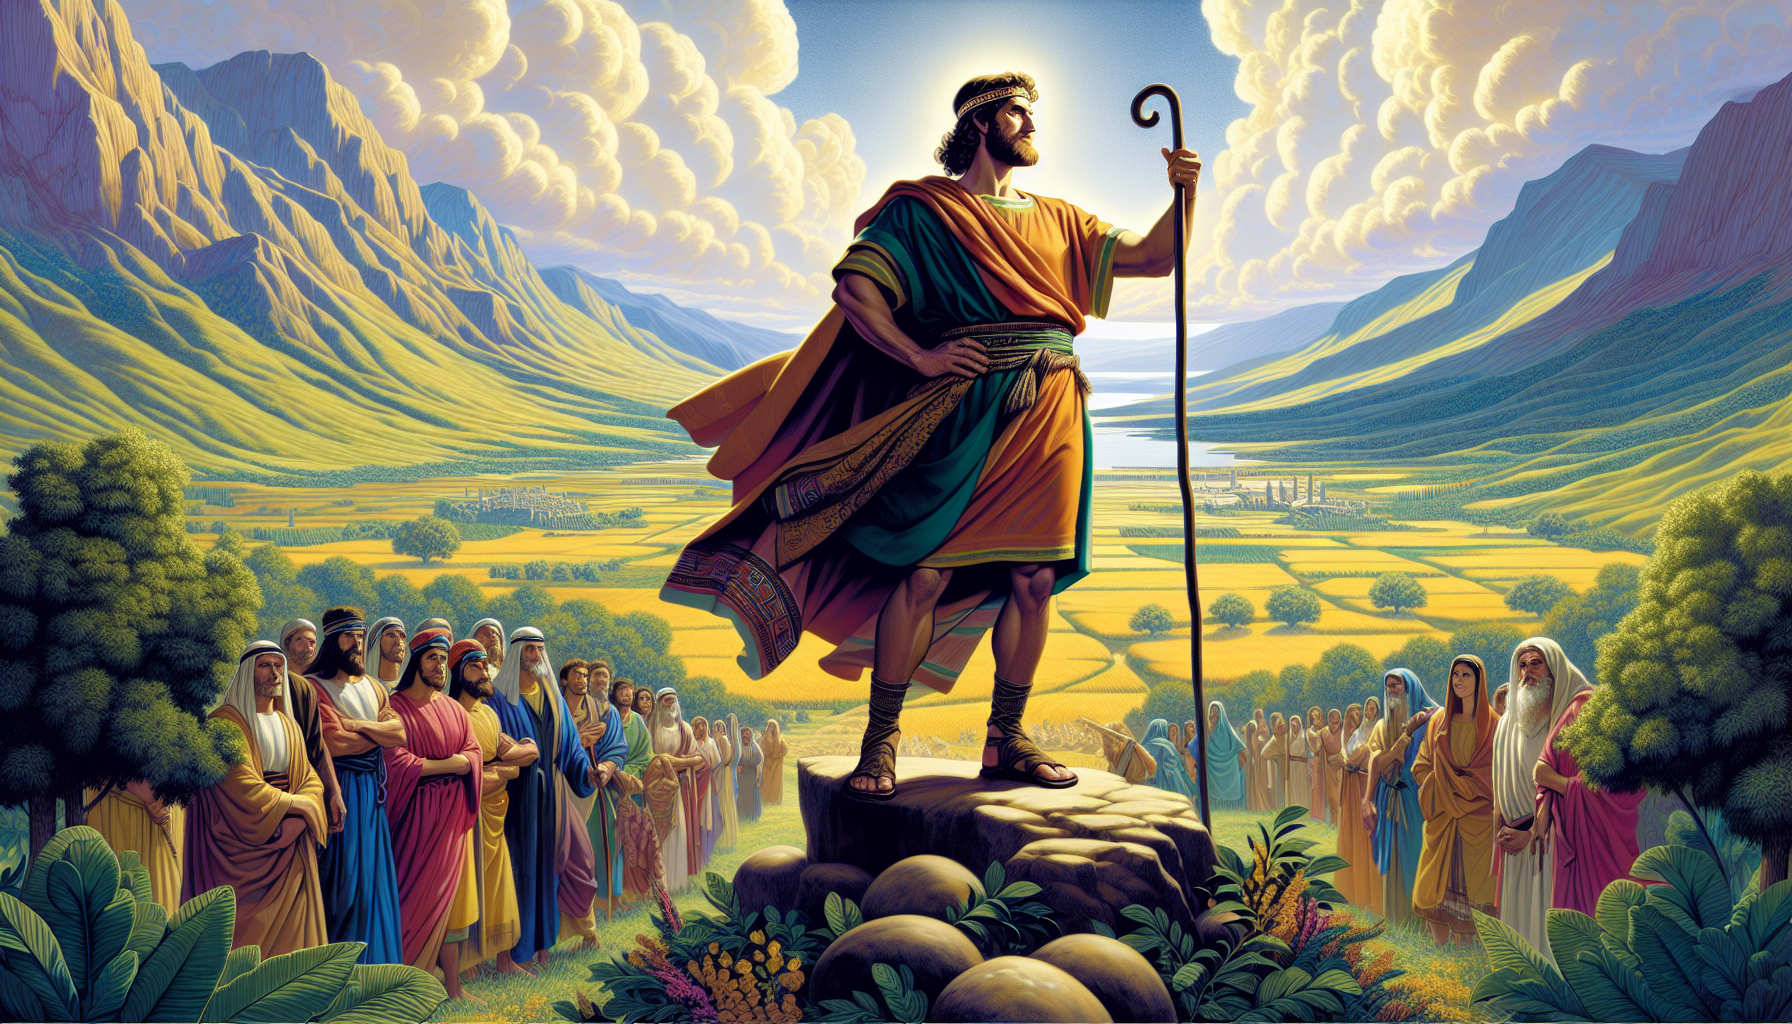 An ancient biblical scene featuring Caleb, a strong and courageous figure, standing confidently on a mountaintop overlooking the Promised Land. Dressed in traditional Israelite garments, he holds a st